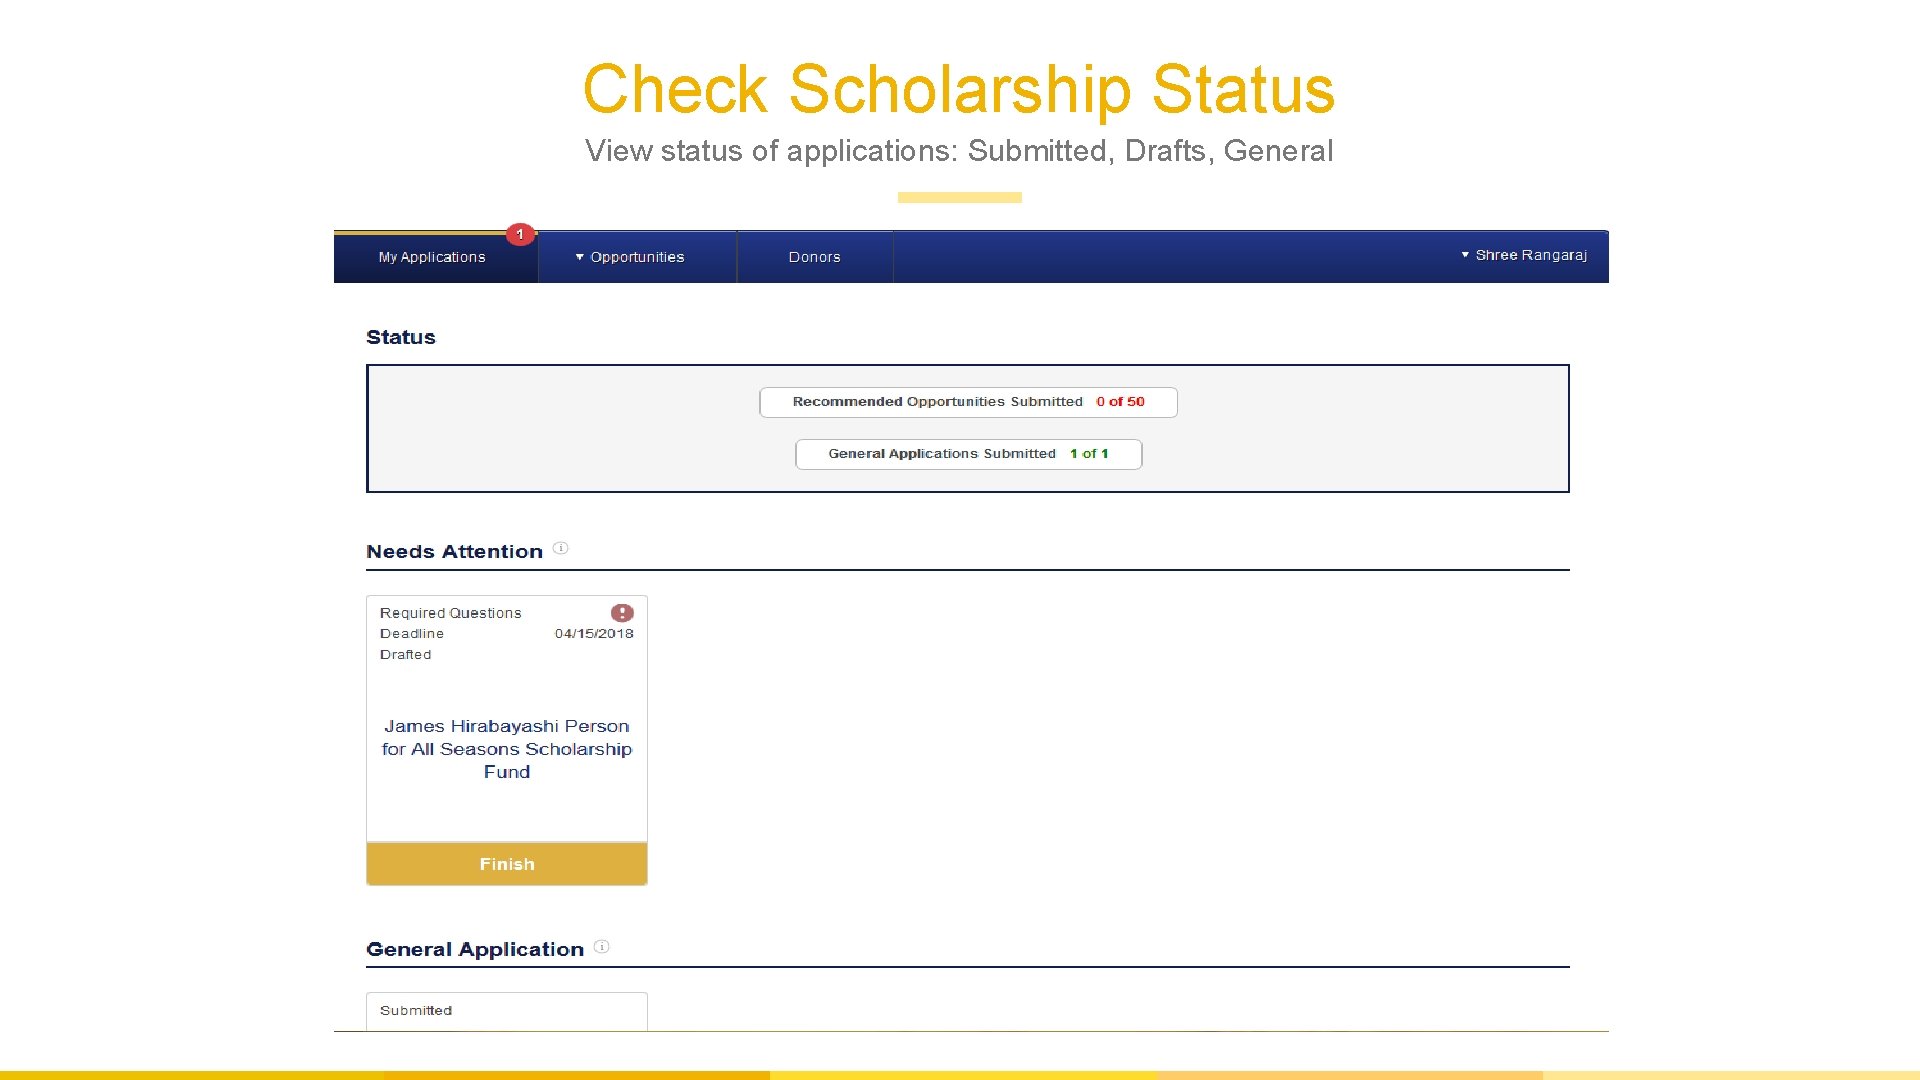 Check Scholarship Status View status of applications: Submitted, Drafts, General 